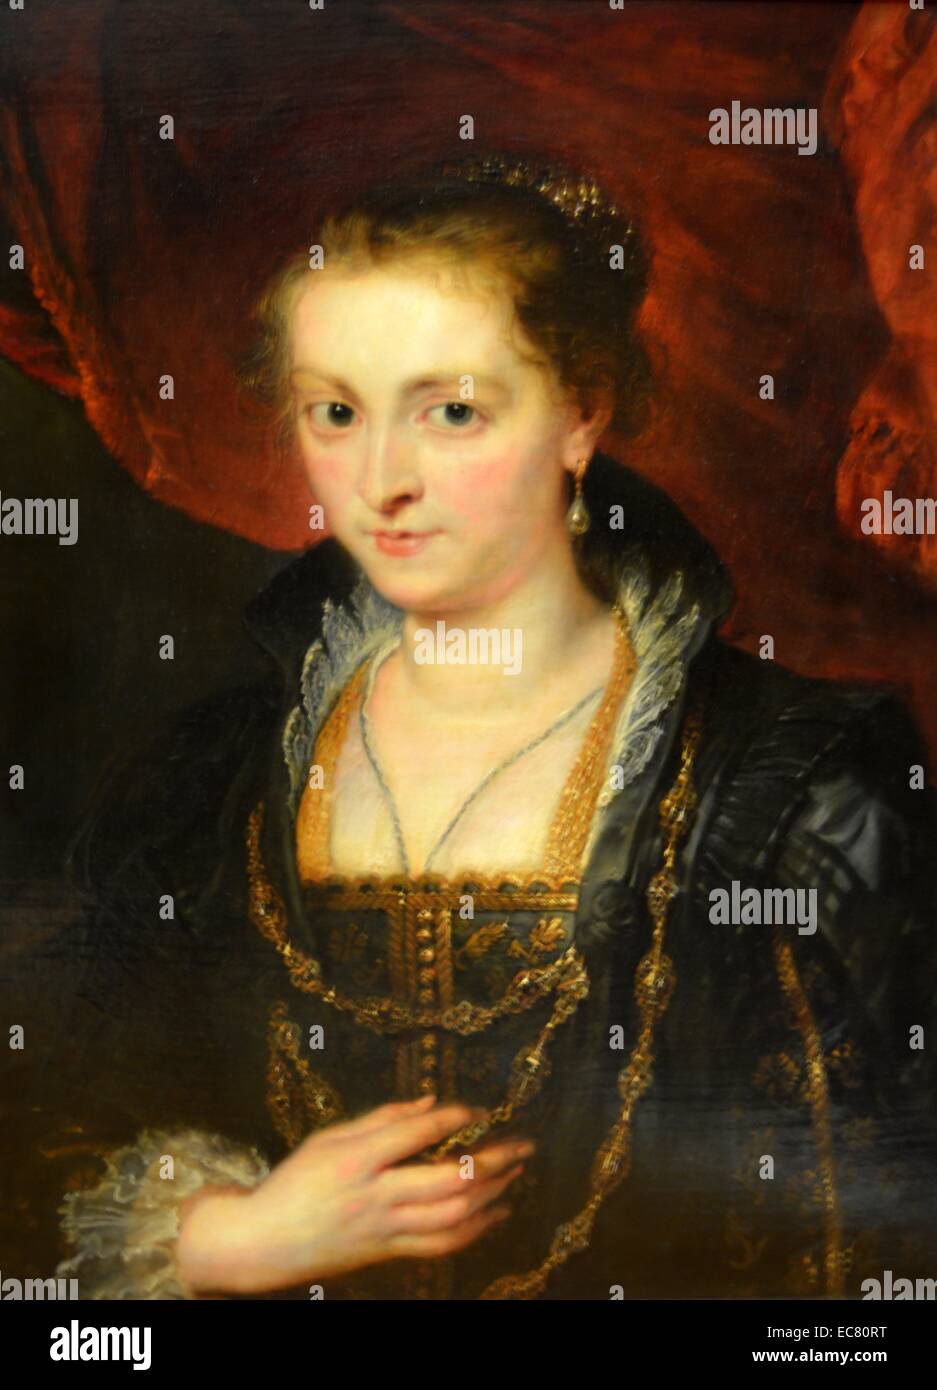 Portrait of a lady by Peter Paul Rubens (1577-1640), a Flemish Baroque painter. Stock Photo